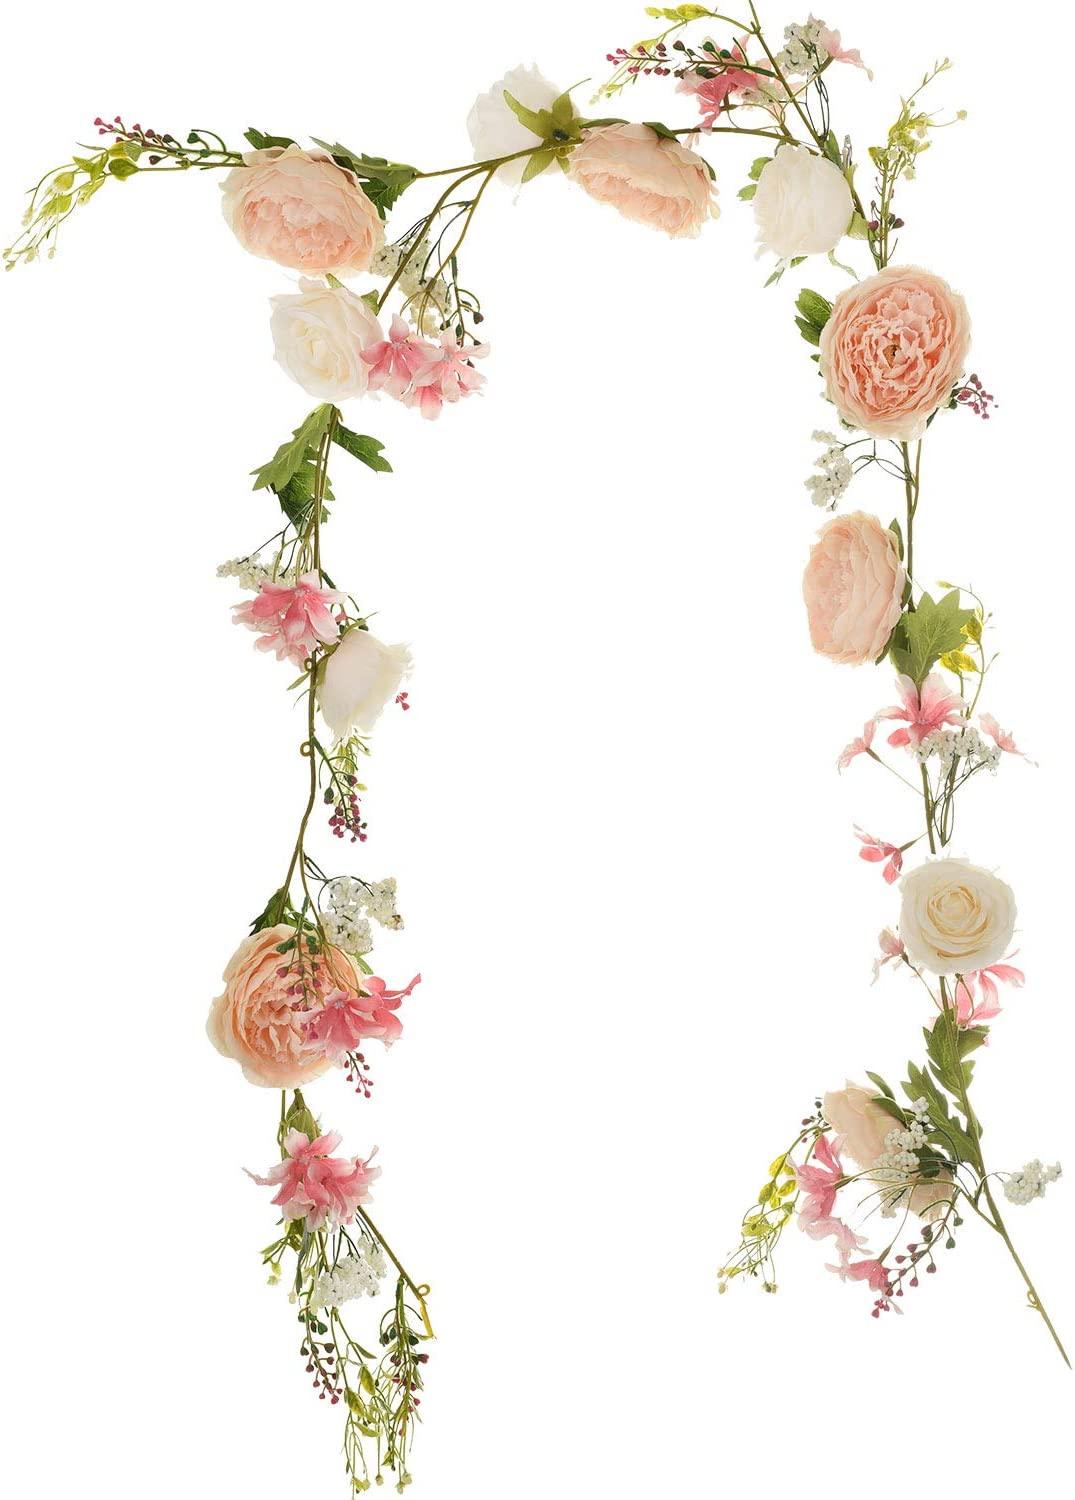 6ft Artificial Peony Garland Flowers, Floral Greenery Garland Rose Flower Vine Garland with Mixed Peony Flowers - If you say i do